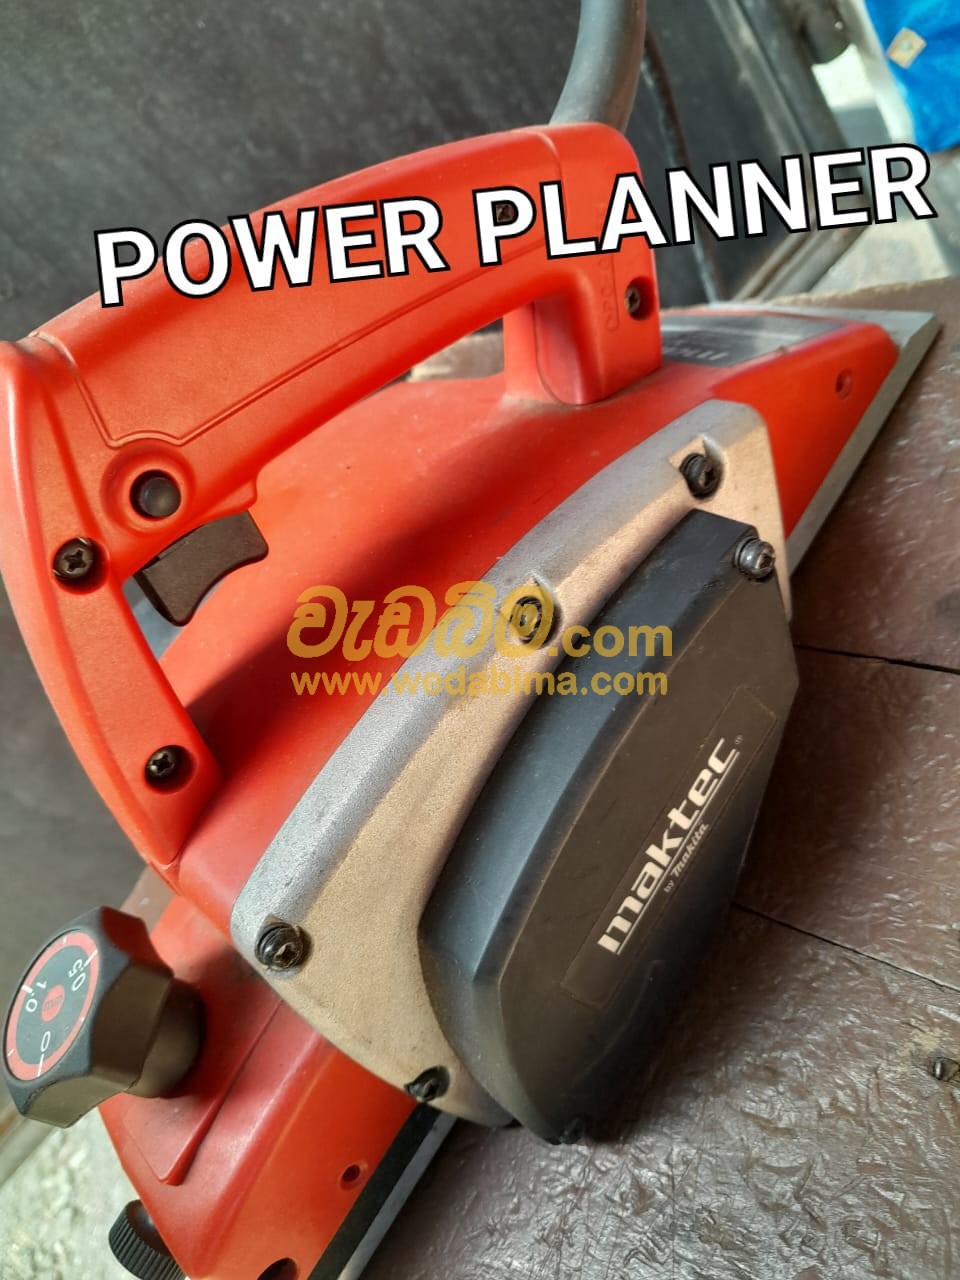 power planner price in colombo